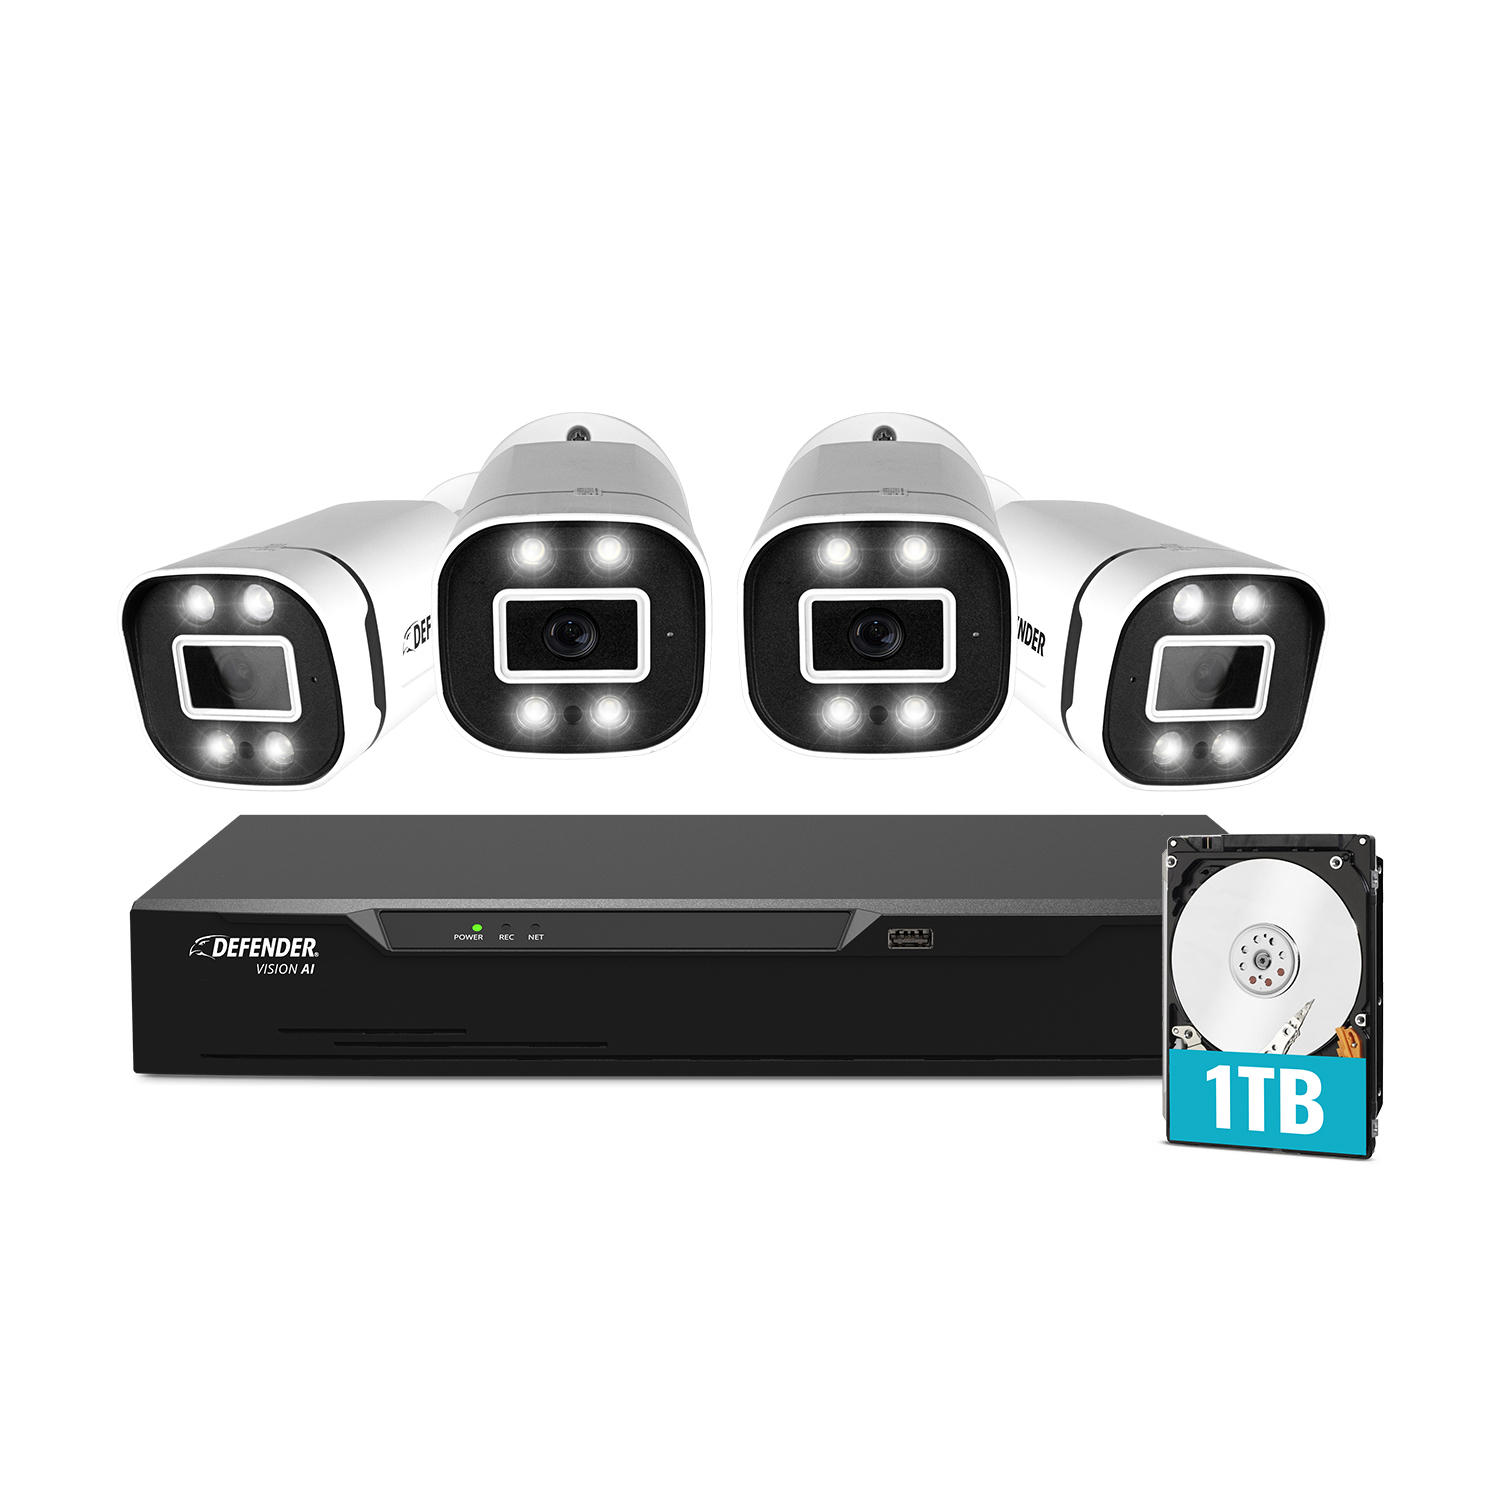 Defender Ultra HD 4K (8MP) 1TB Wired Security System with 4 Night Vision Cameras